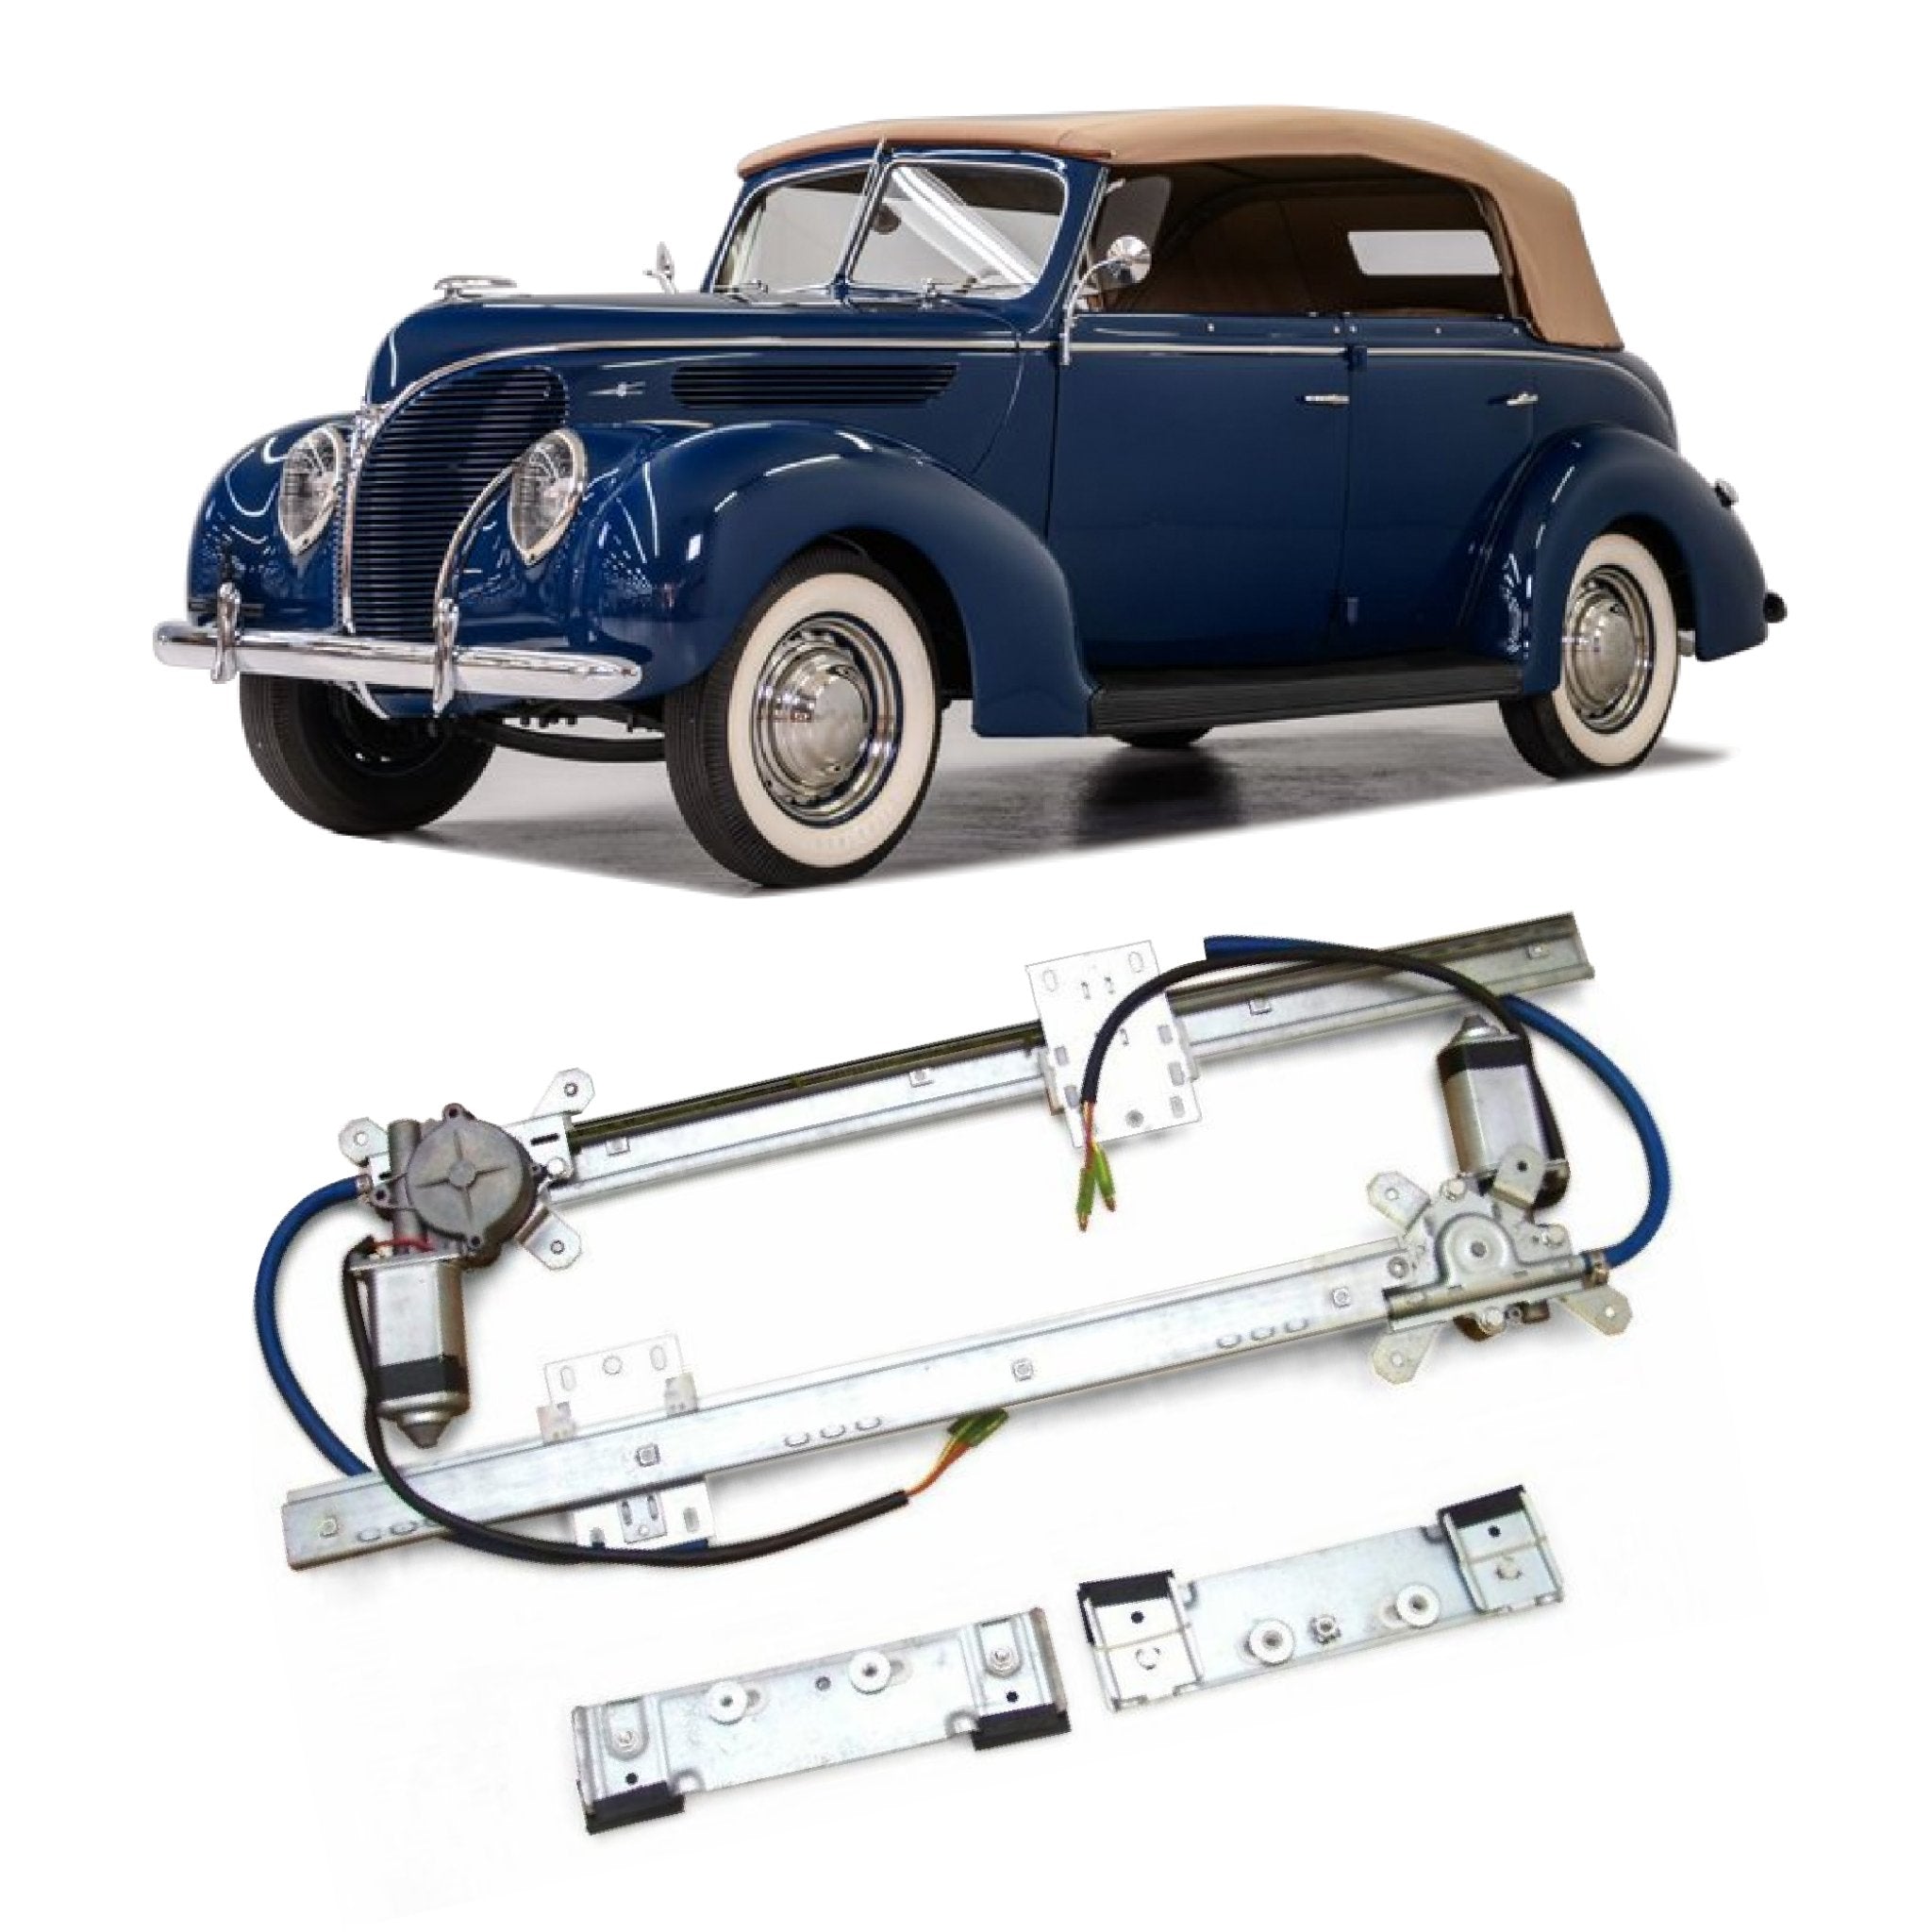 2 Door Flat Glass 12V Electric Power Window Conversion Kit for 1938 Ford Phaeton